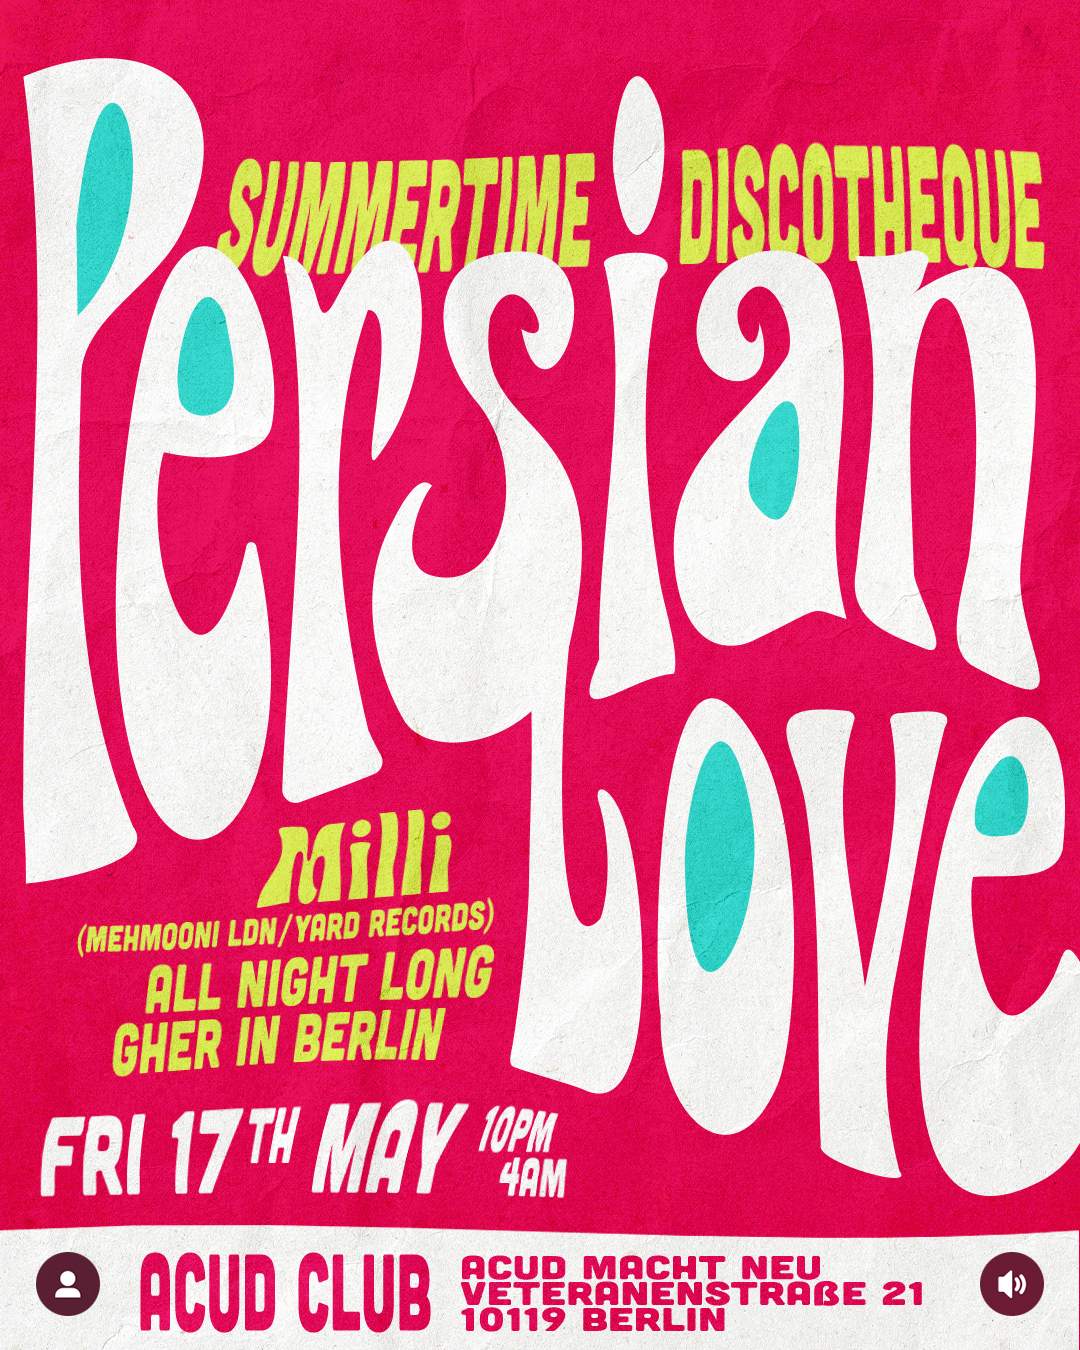 Persian Love: Summer Discotheque with Milli (Mehmooni LDN/ YARD Records) All Night Long - フライヤー表